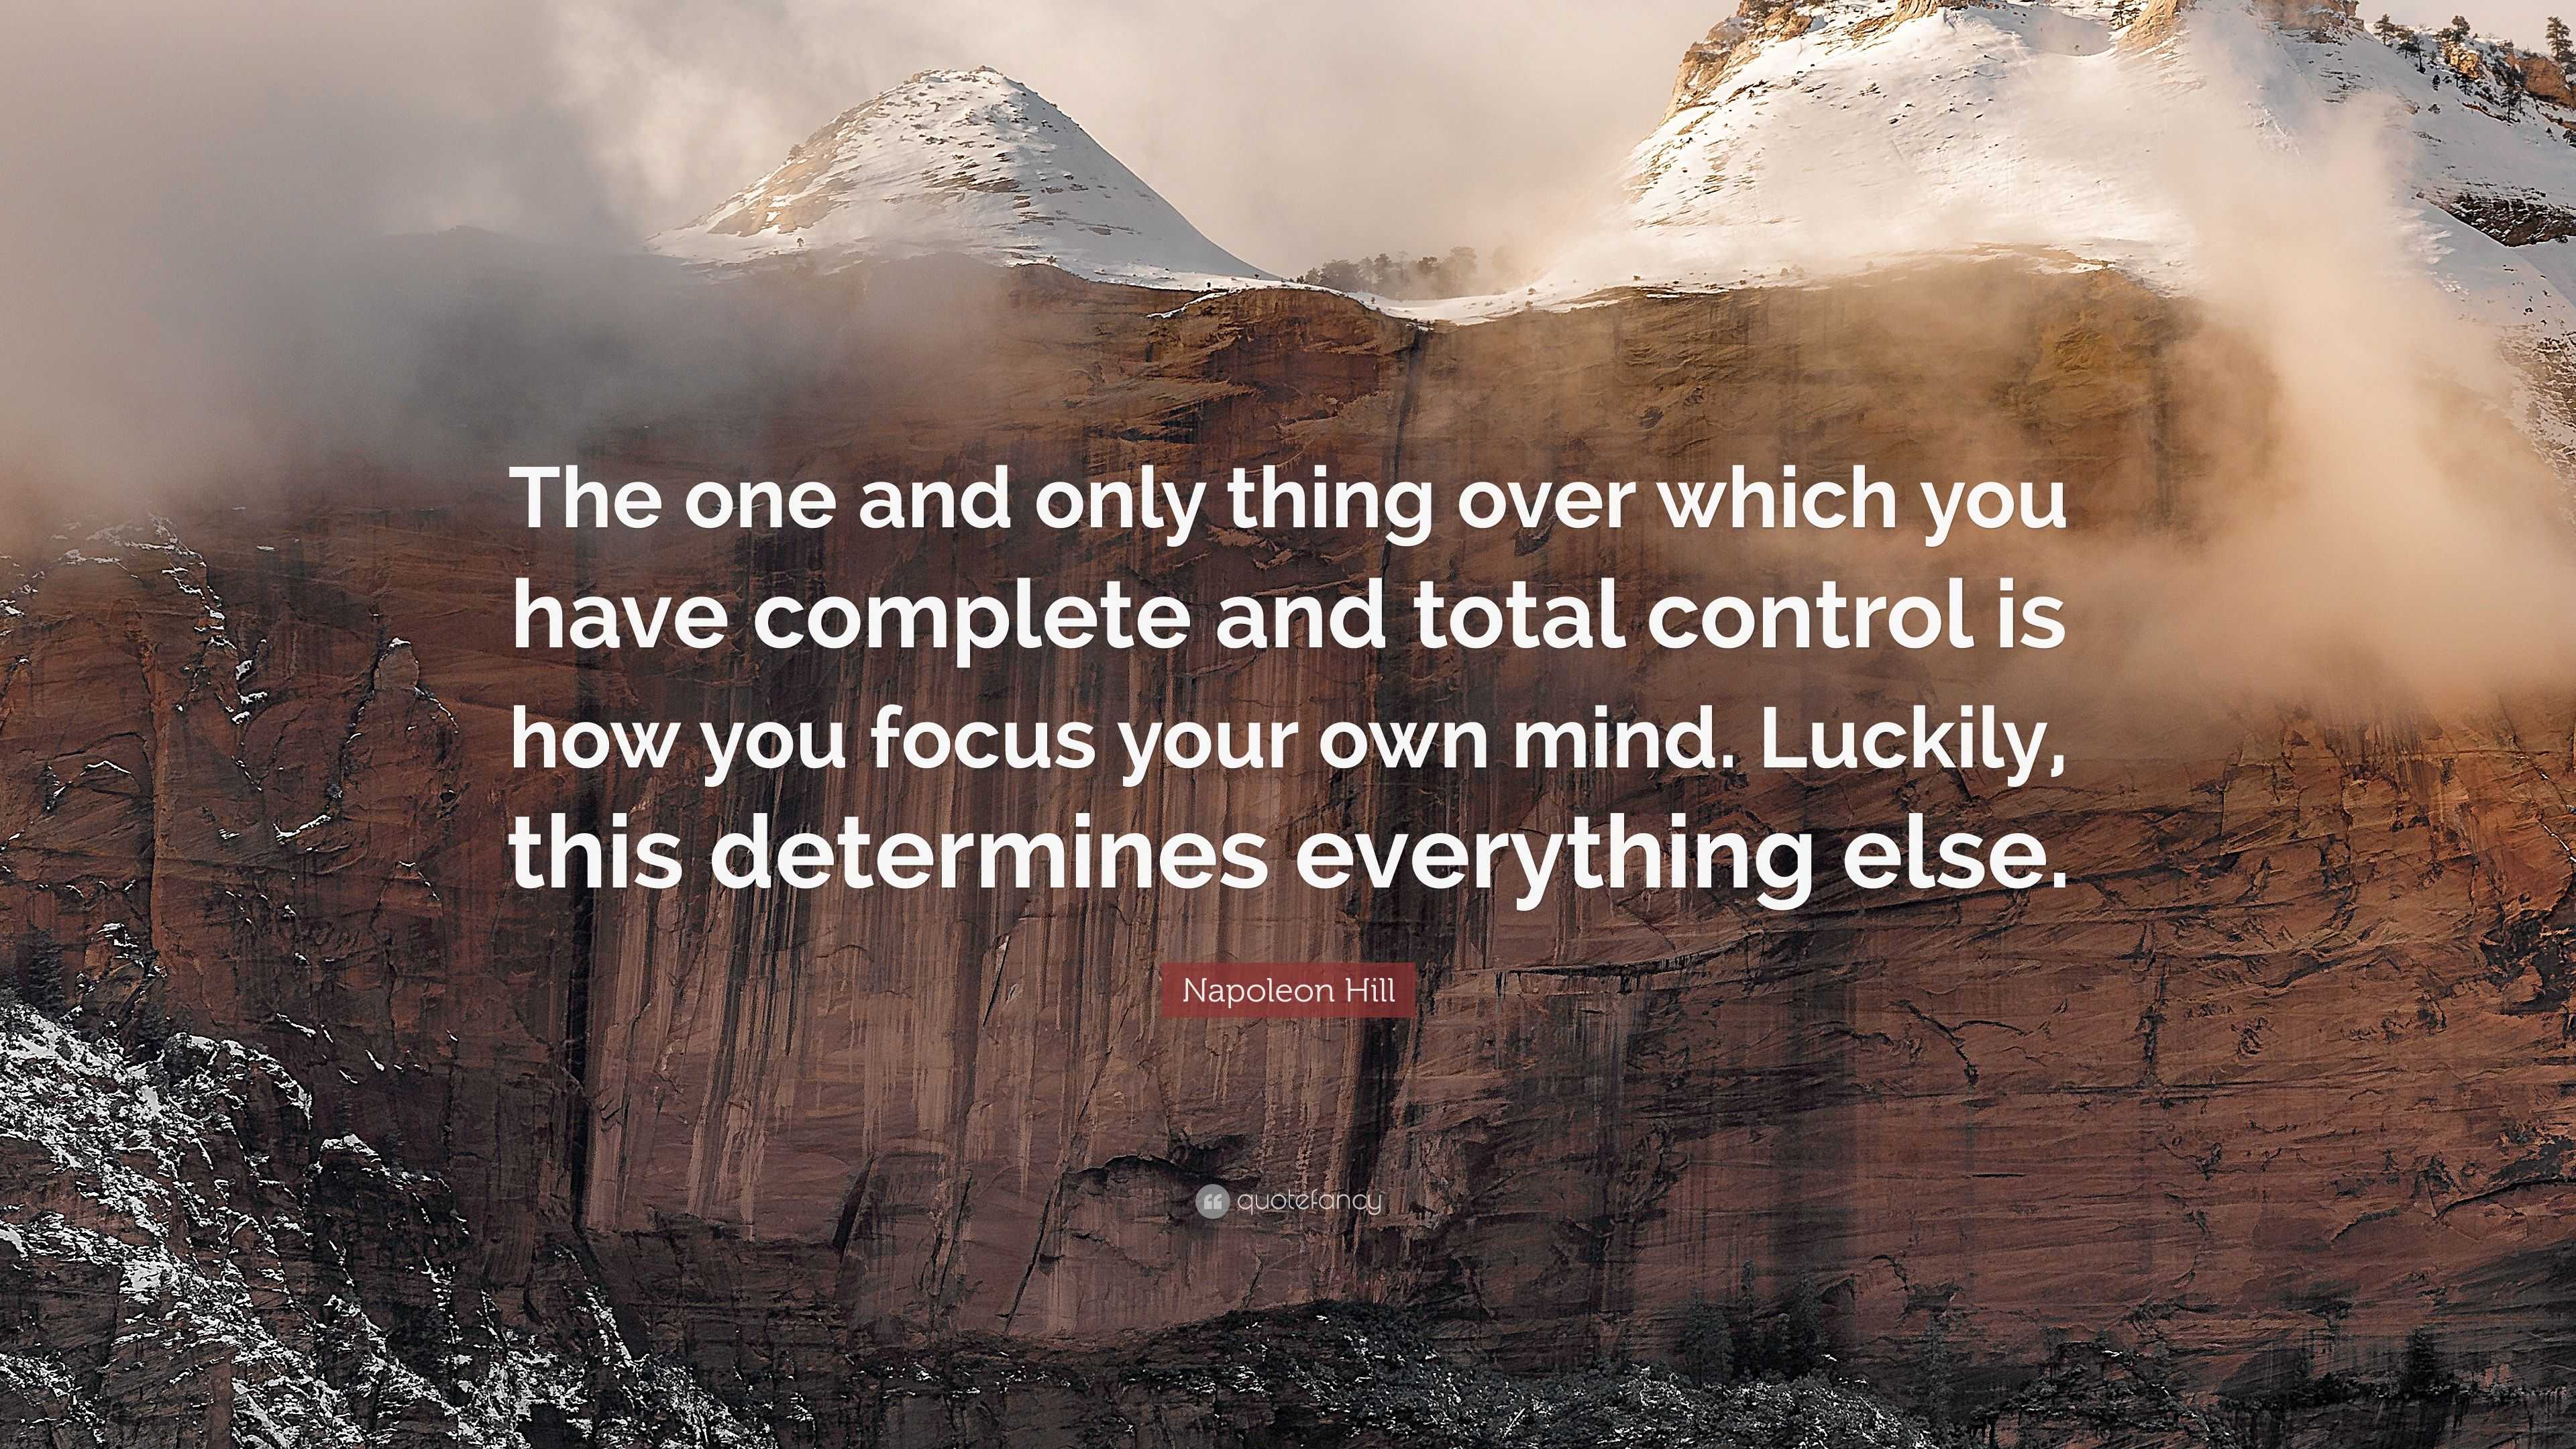 Napoleon Hill Quote “The one and only thing over which you have plete and